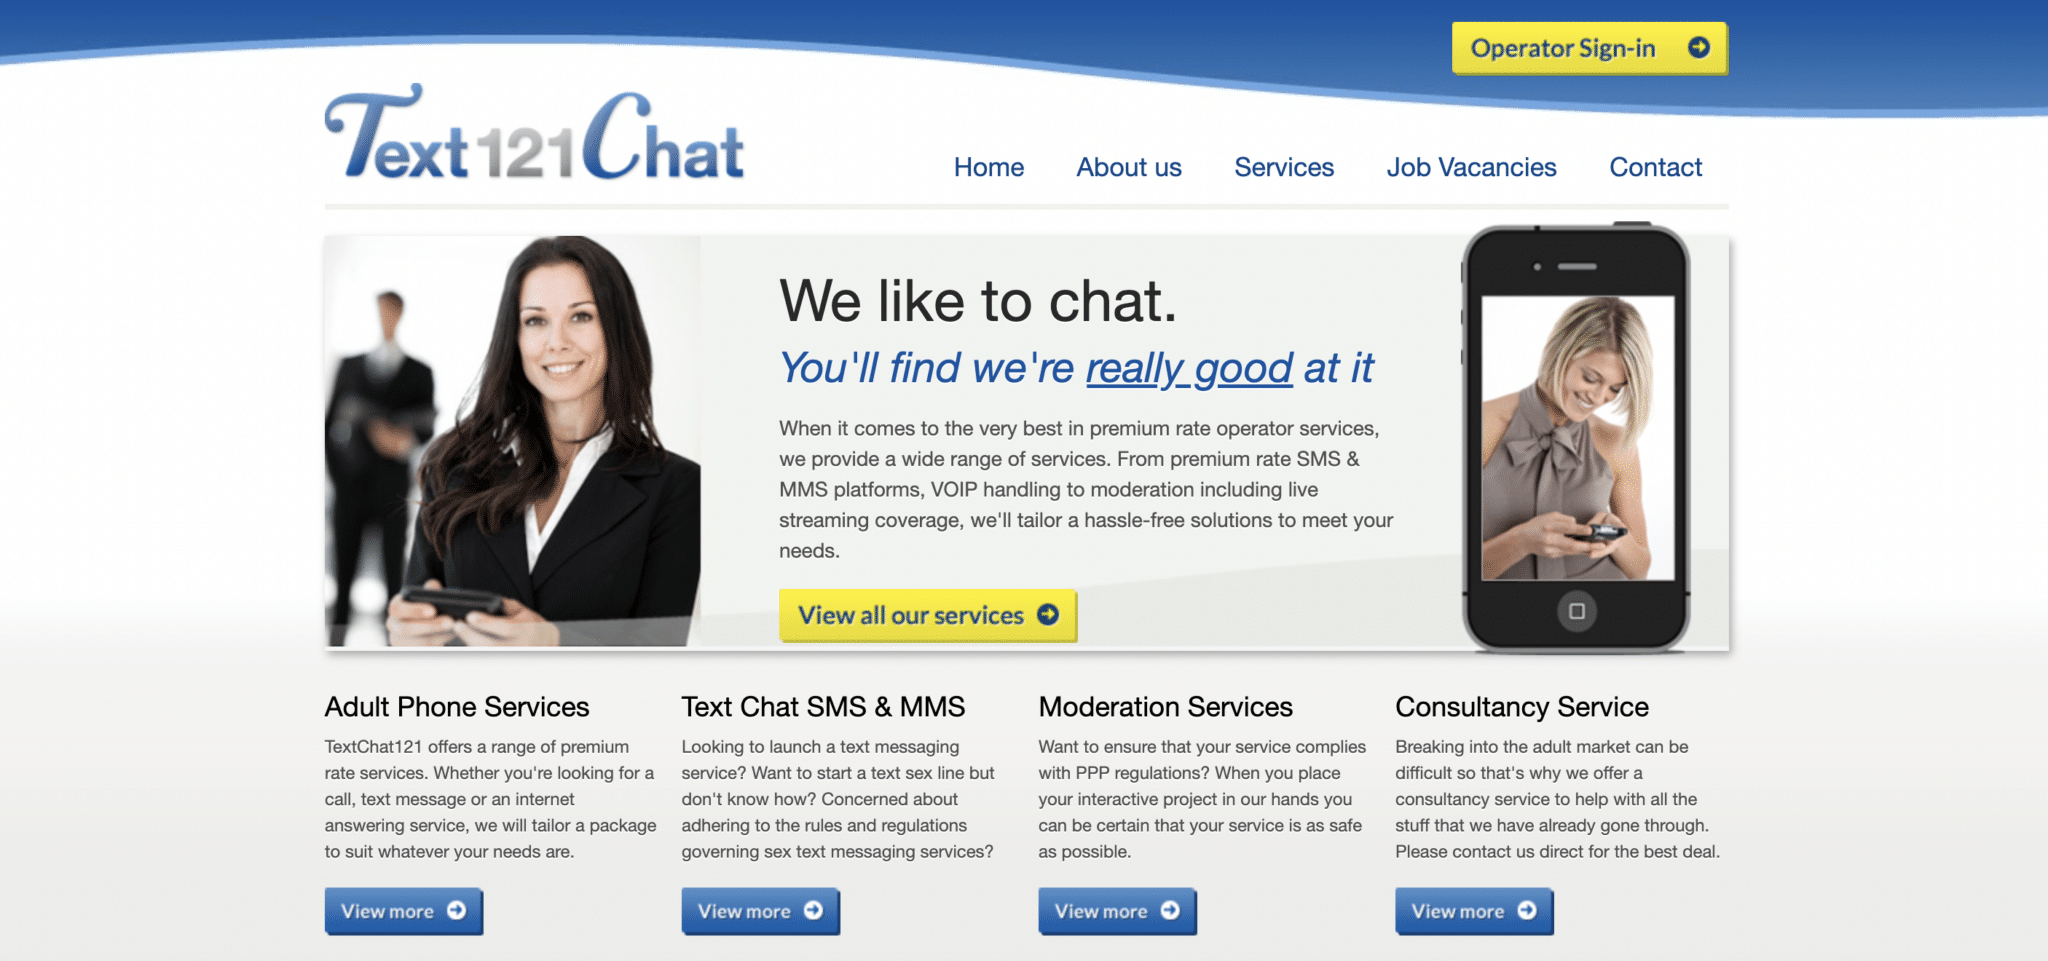 get paid to chat with text121chat